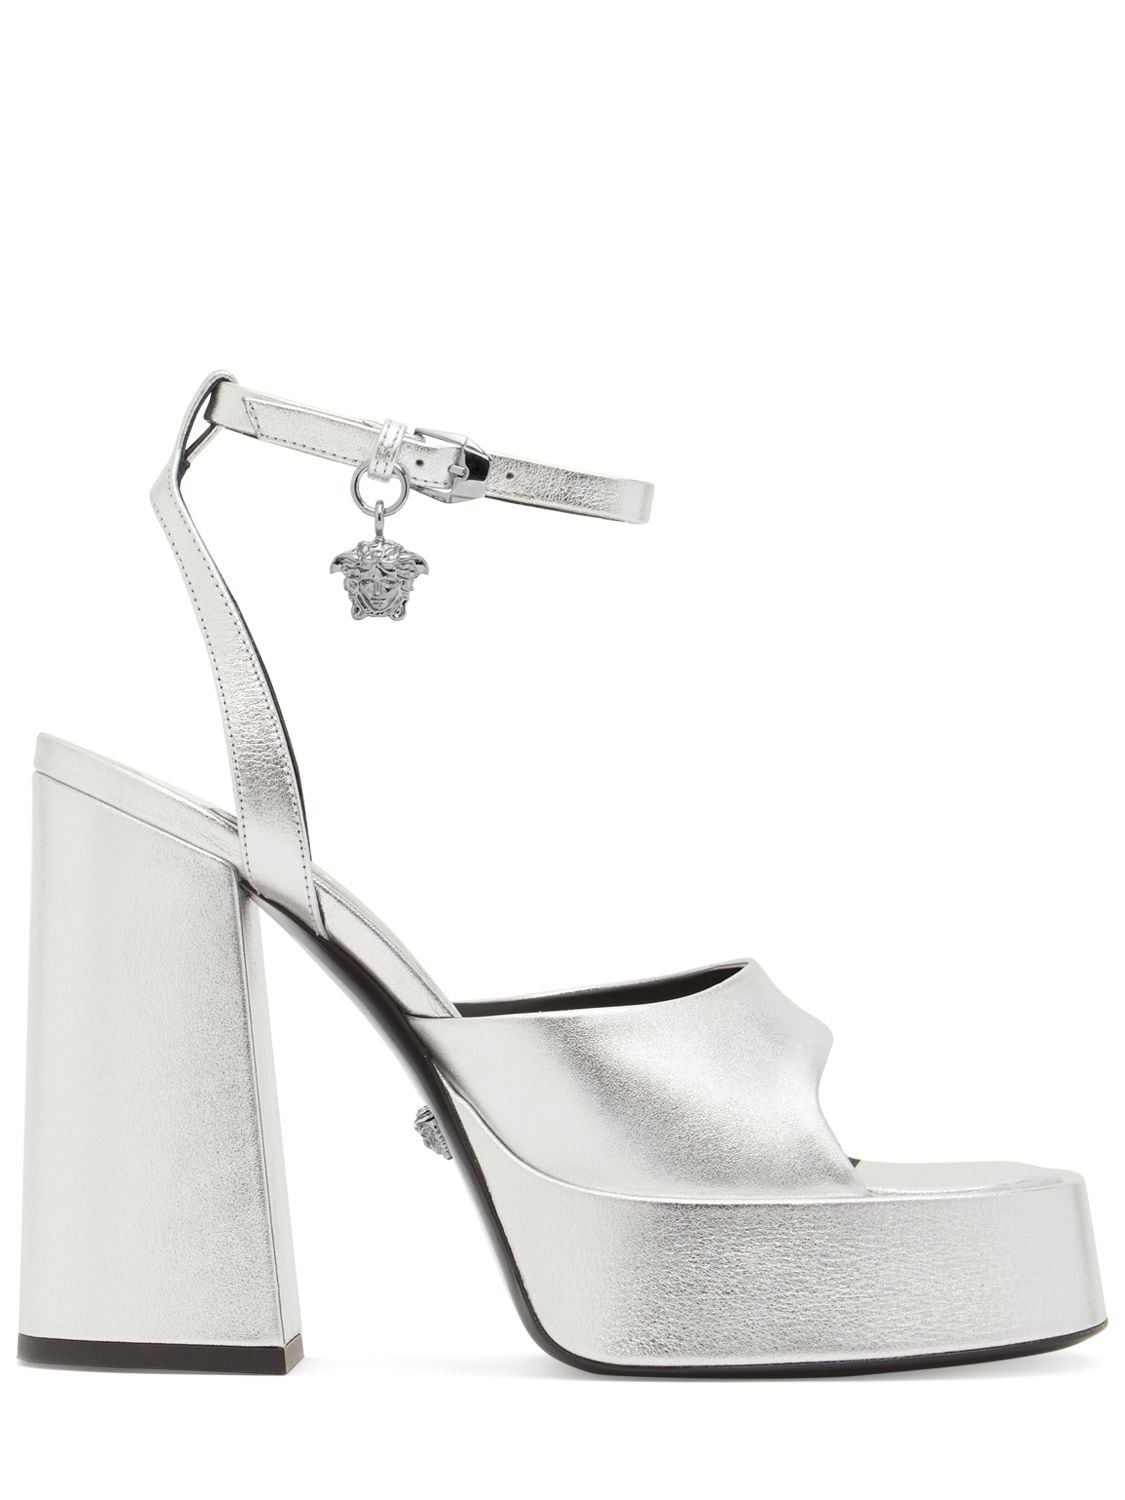 Shop Versace 120mm Metallic Leather Sandals In Silver